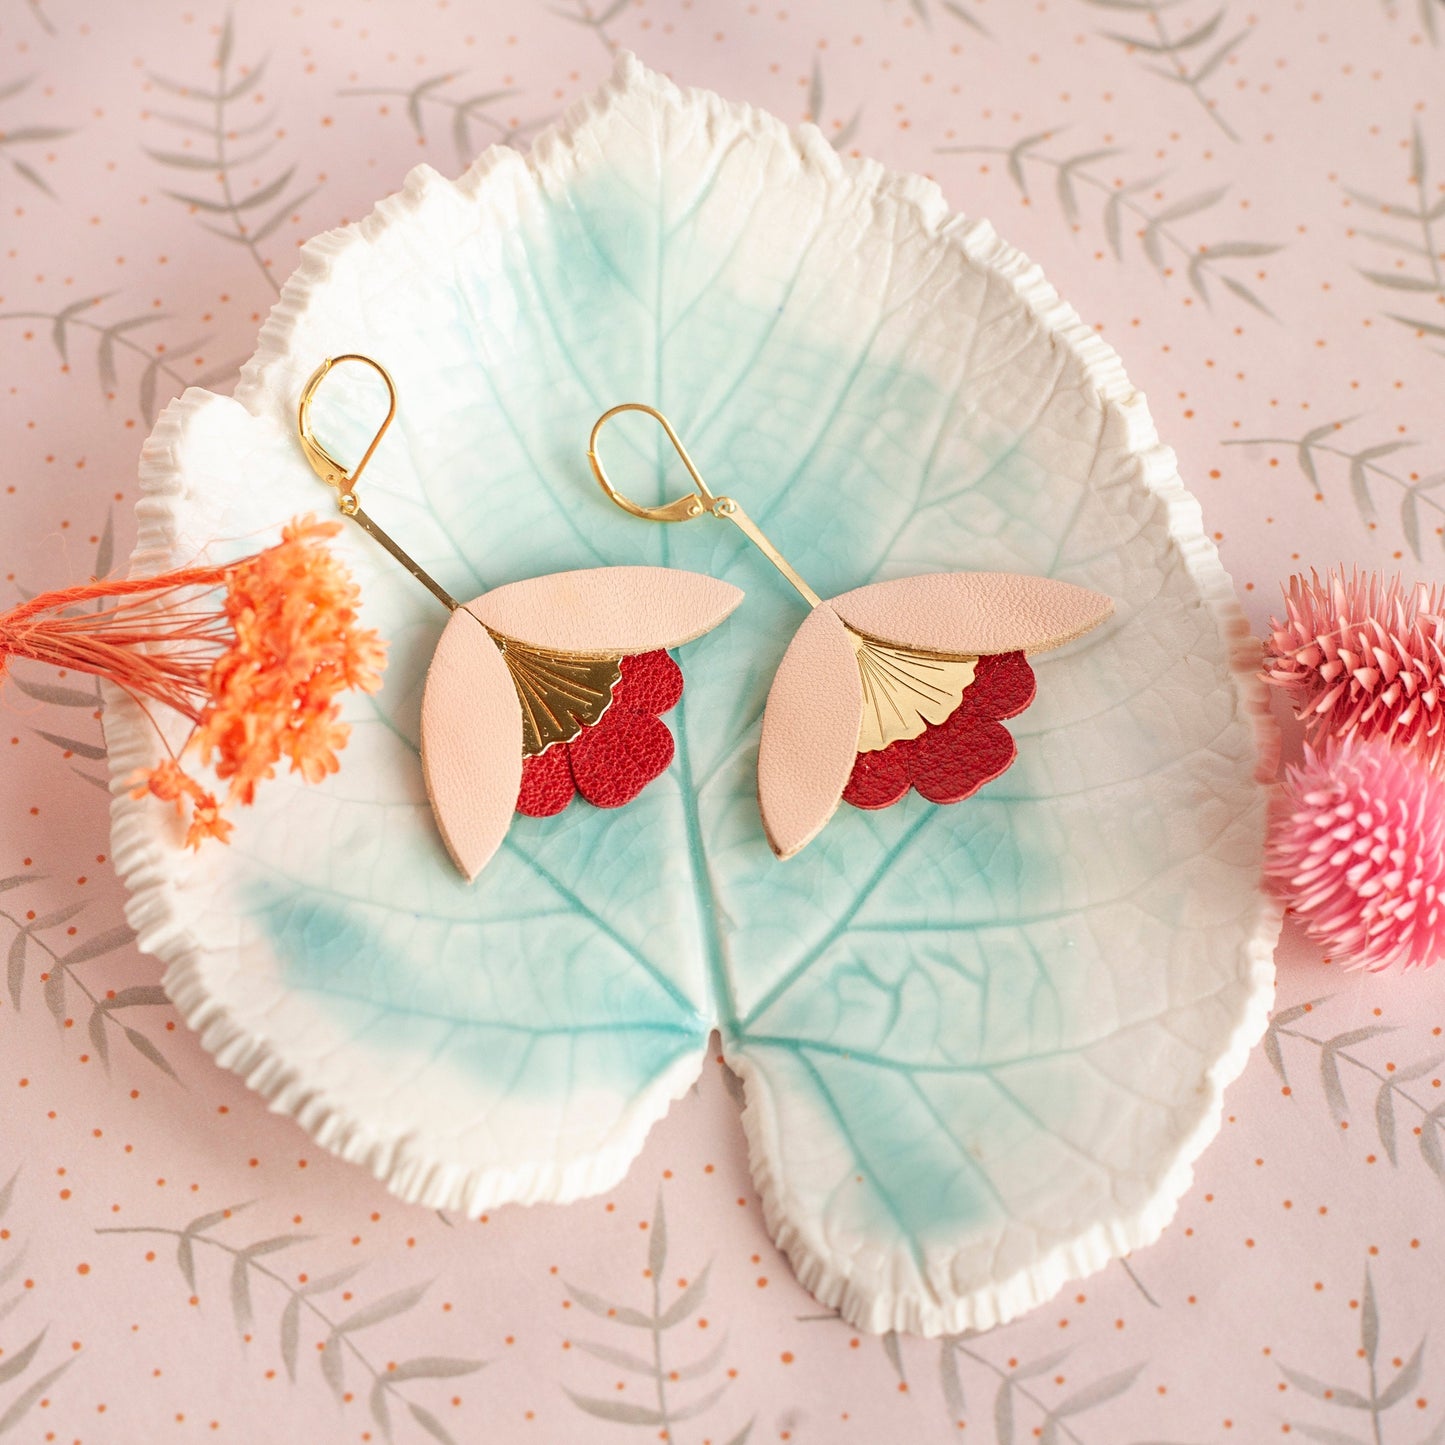 Ginkgo Flower earrings in pink red gold leather